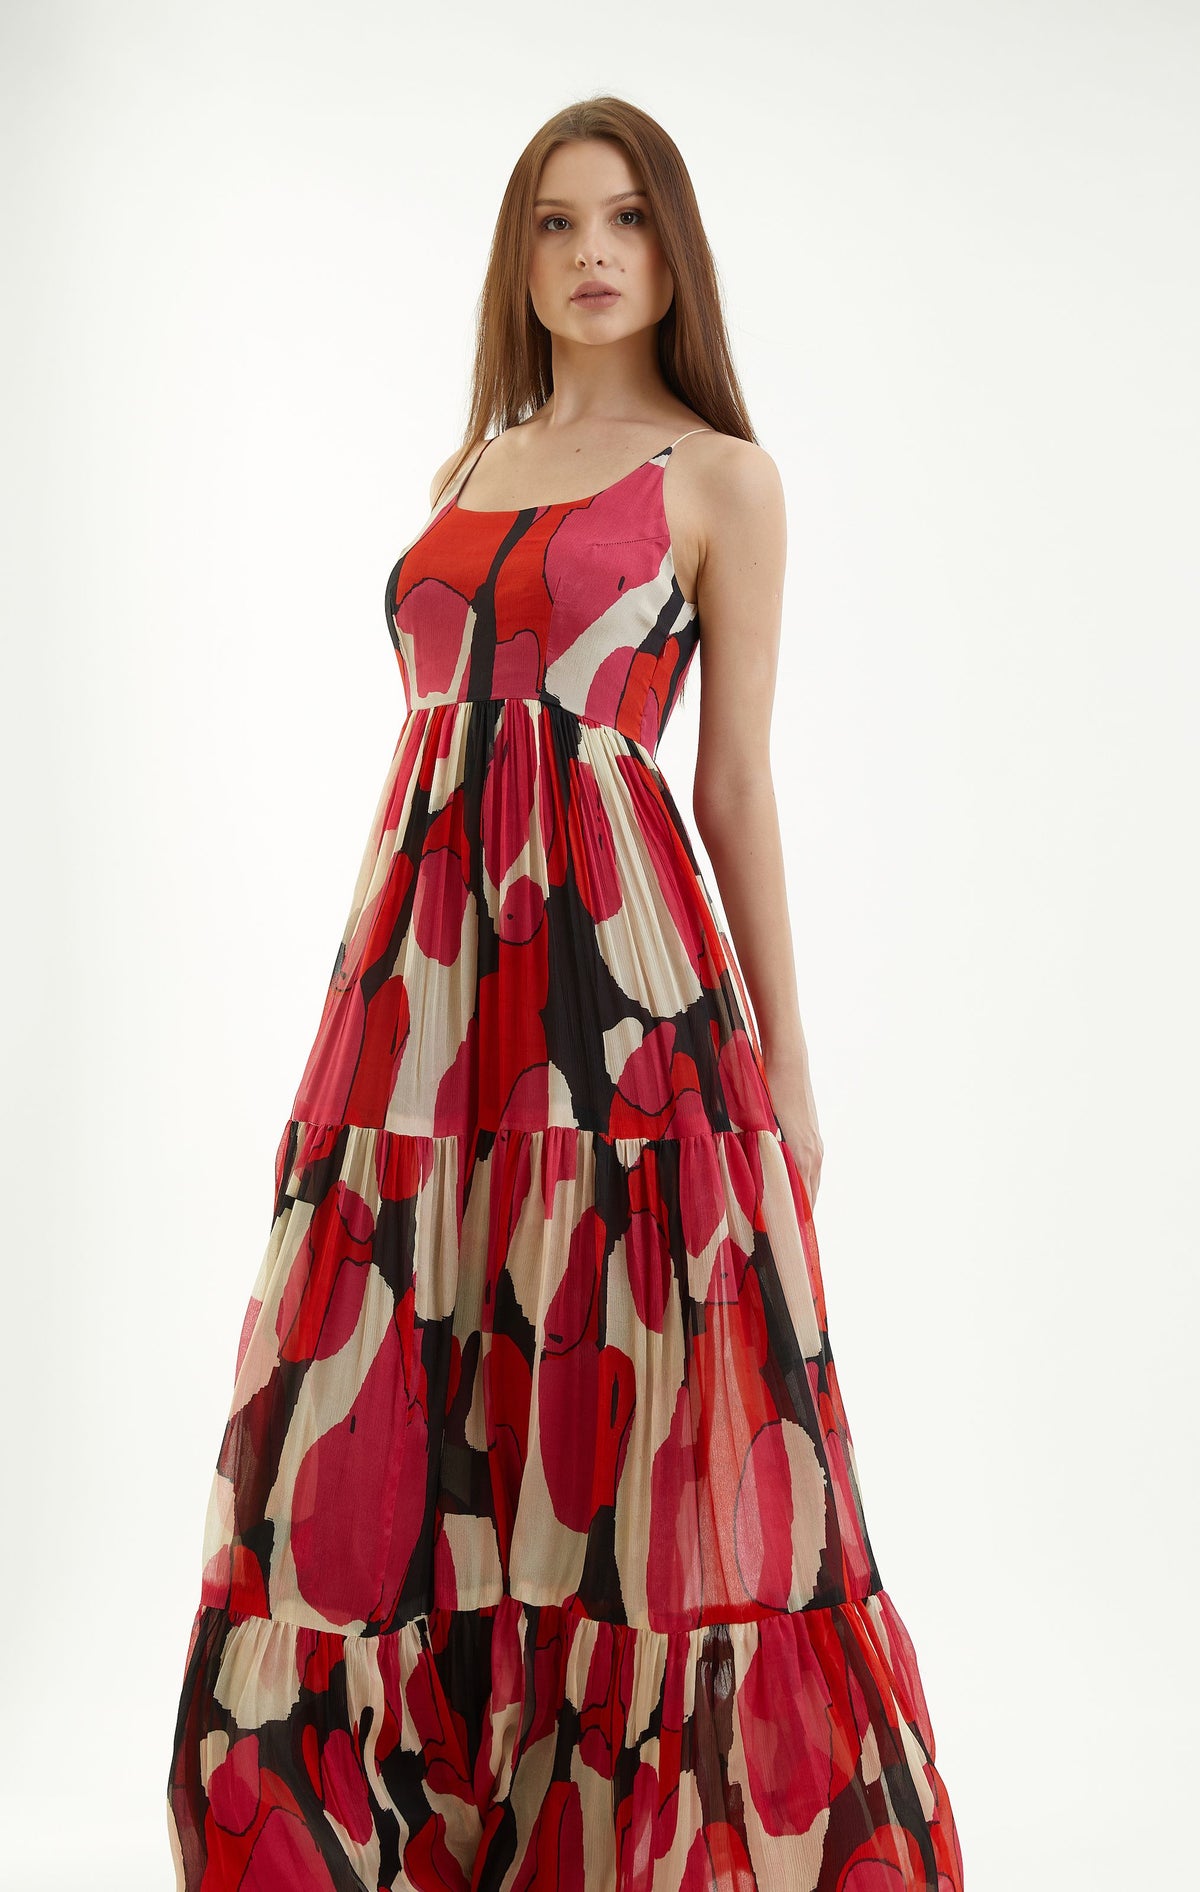 RED, PINK WHITE AND BLACK ABSTRACT FLARE DRESS